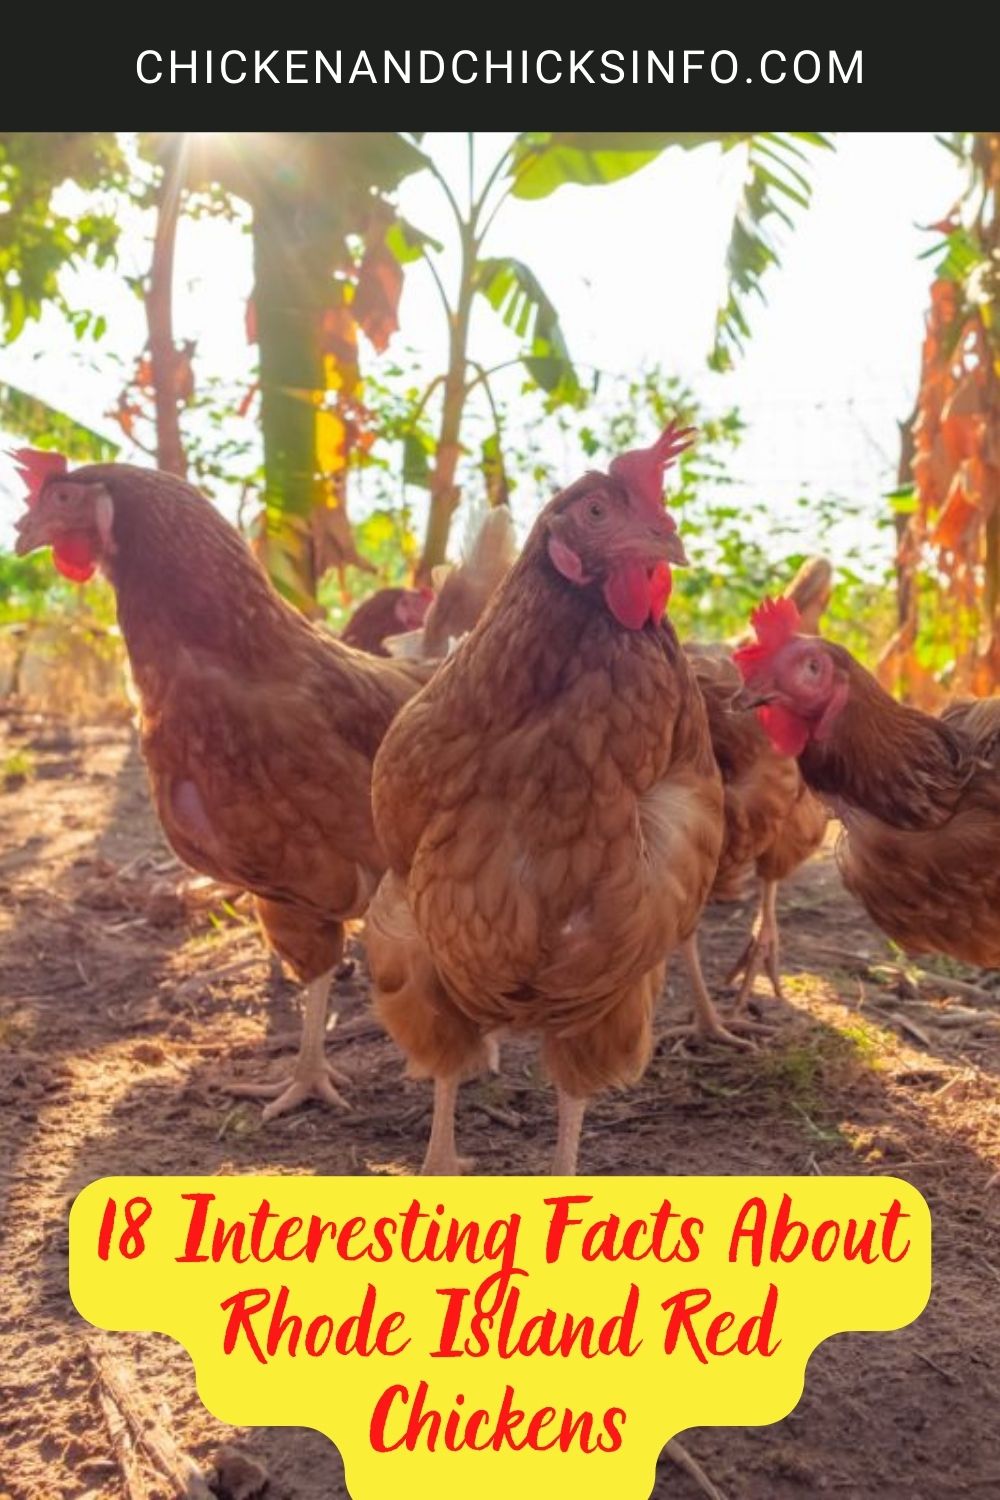 18 Interesting Facts About Rhode Island Red Chickens poster.